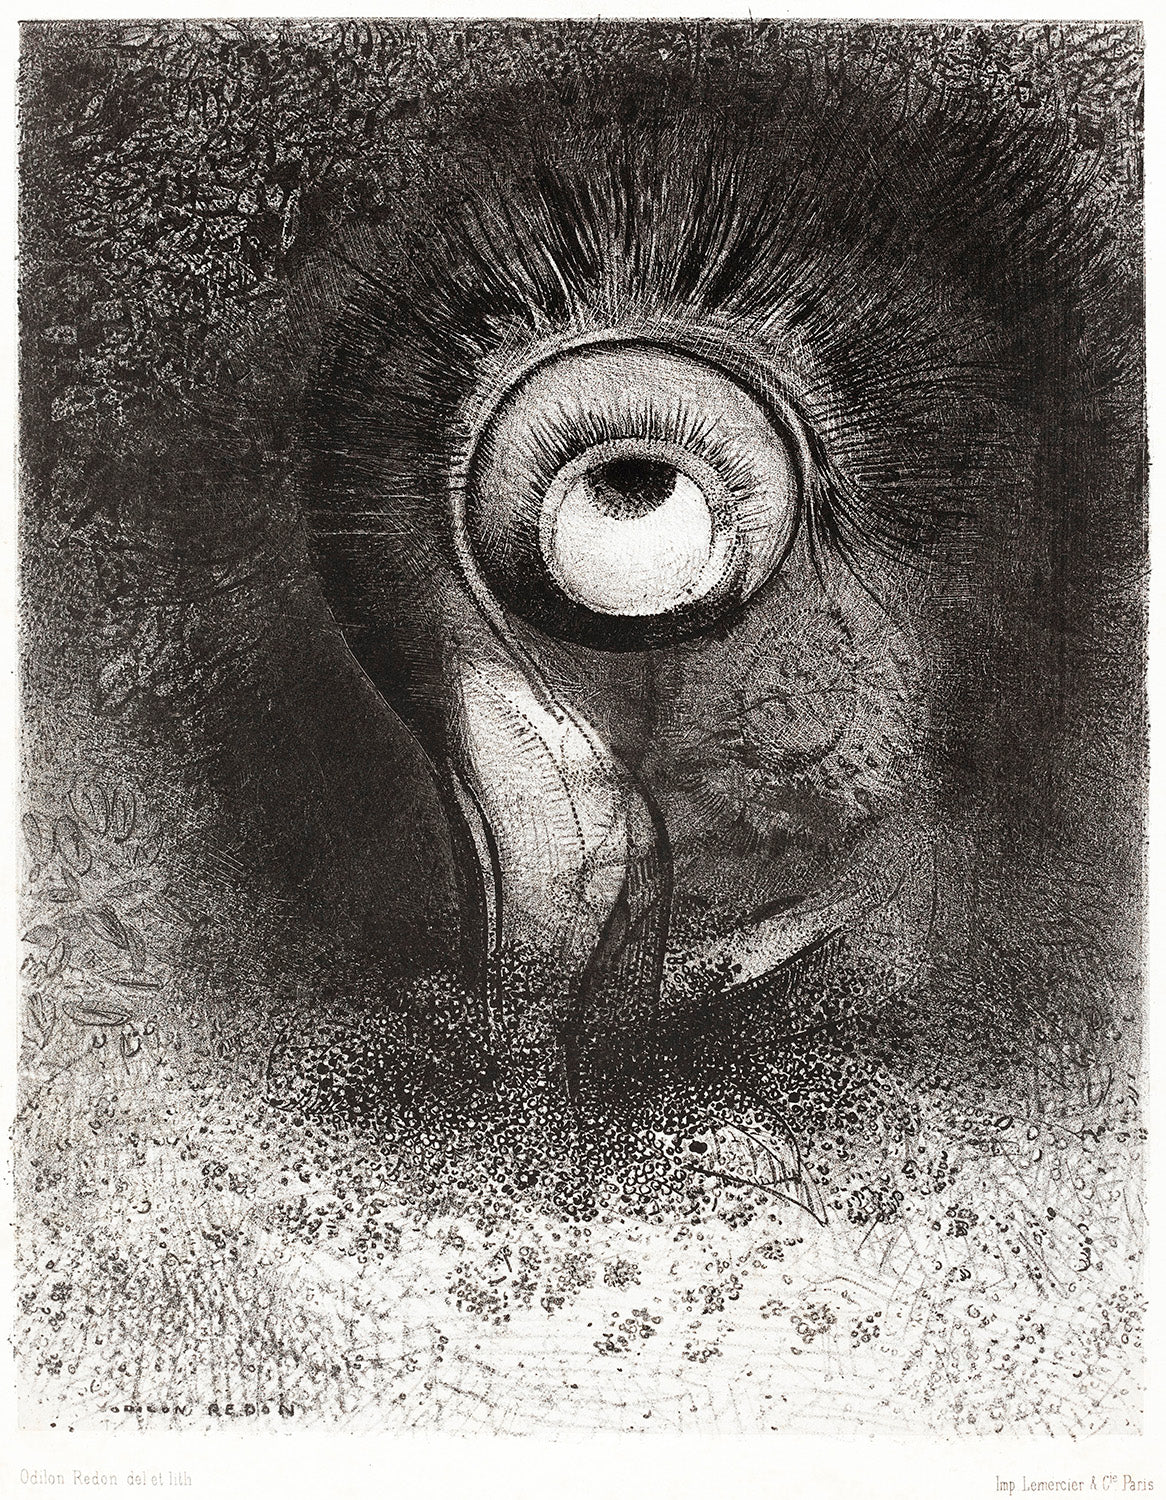 There Was Perhaps a First Vision Attempted by the Flower by Odilon Redon Art Print